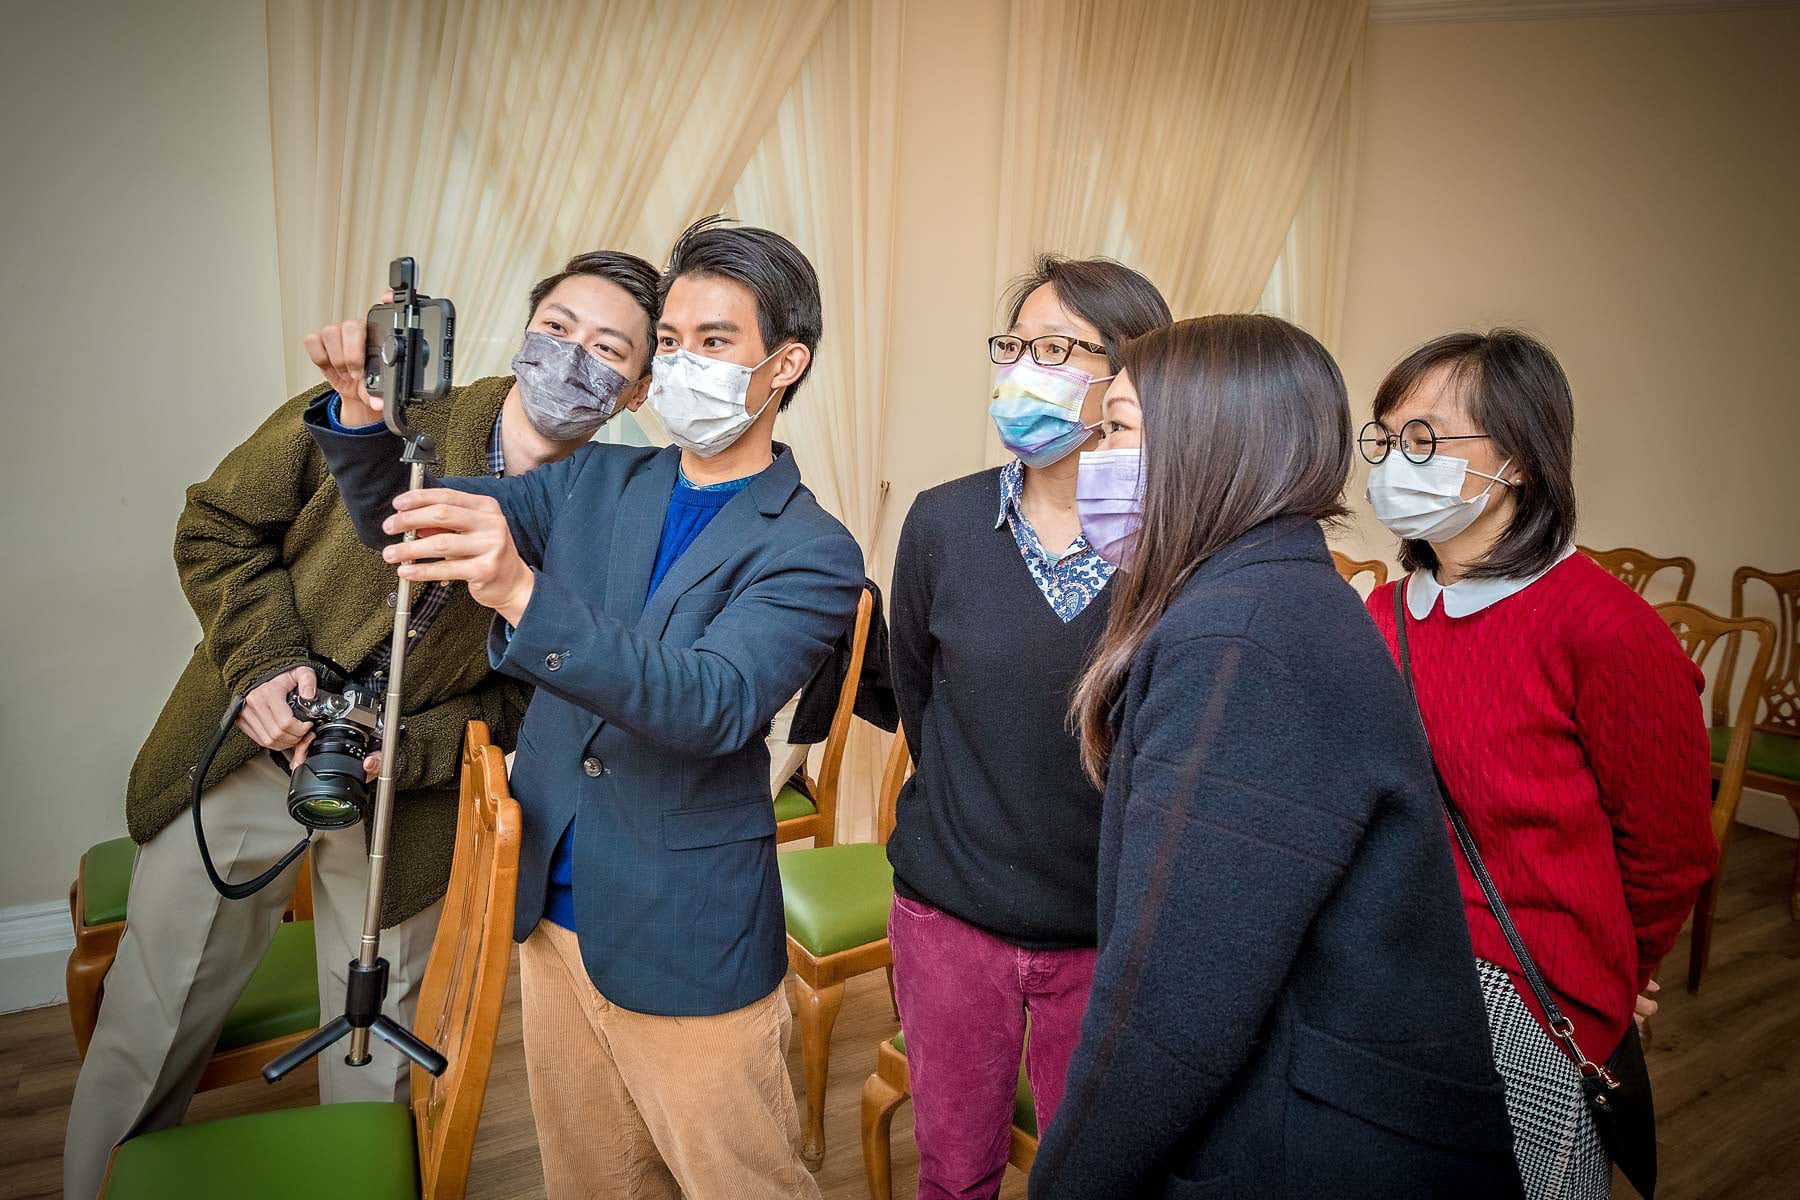 The wedding guests wearing Covid masks chat to relatives on a phone with selfie stick